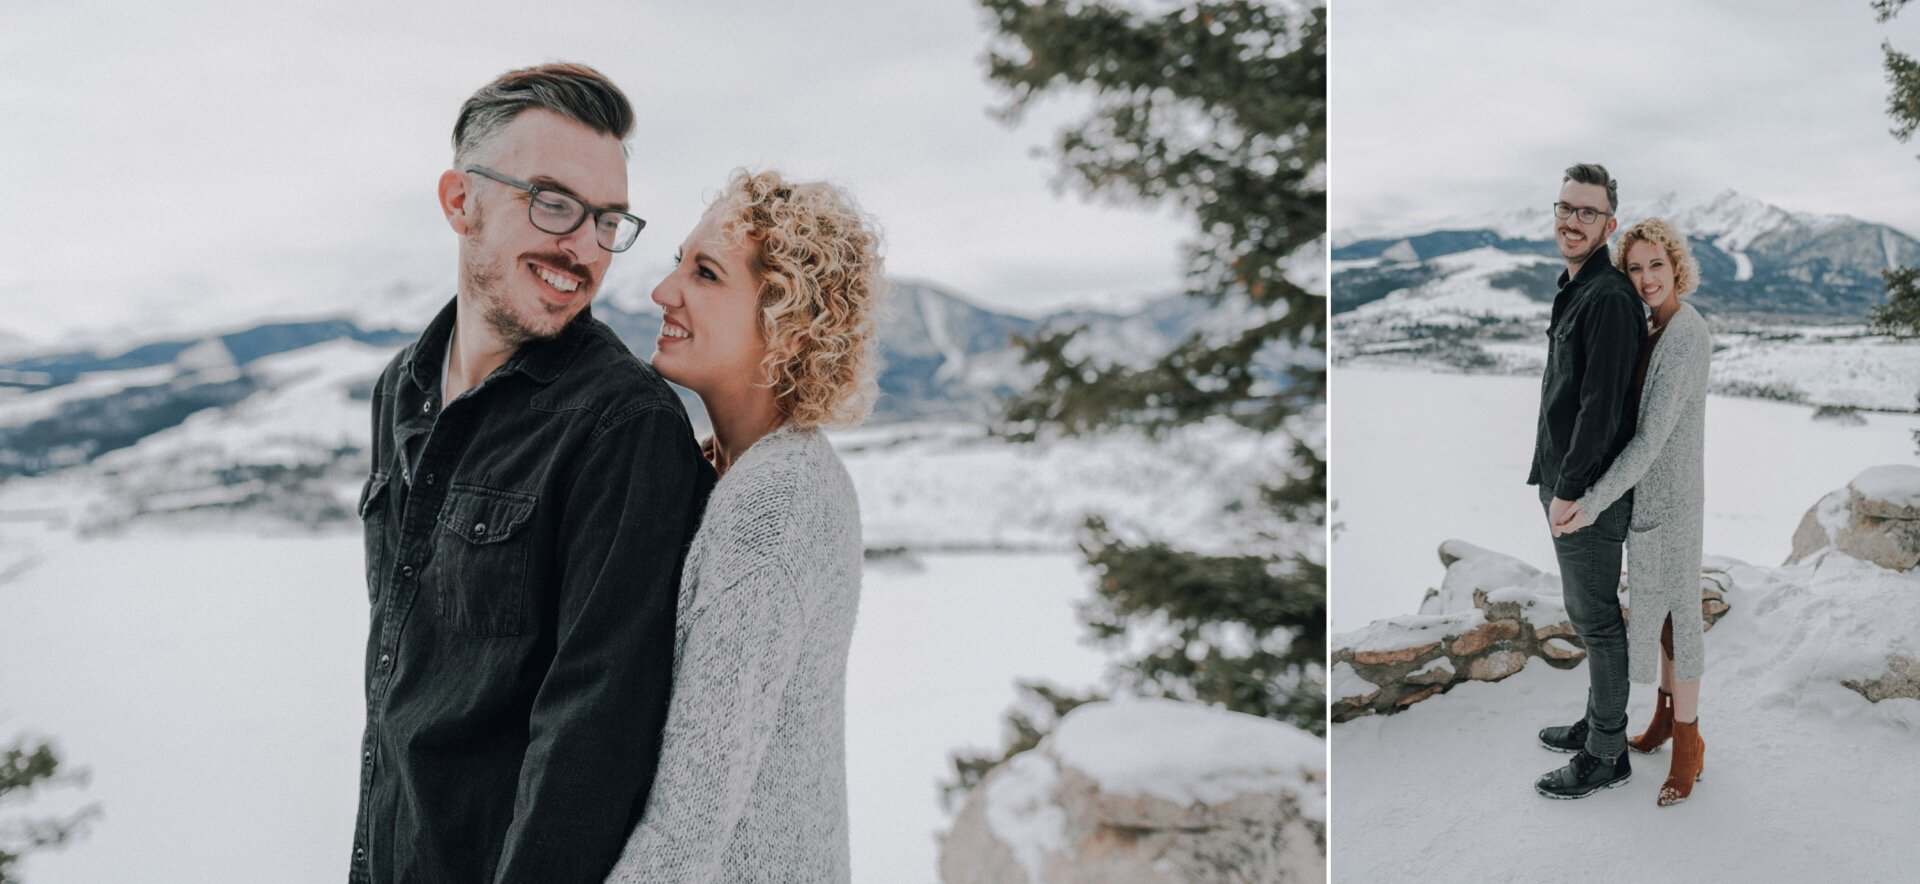 23_Kelsey&Taylor134_Kelsey&Taylor136_frisco_Photographer_engagement_Co_Hannah_Session_Photography_Minnesota_Snowy_Colorado_adventure_ampe_Mountain_engaged.jpg